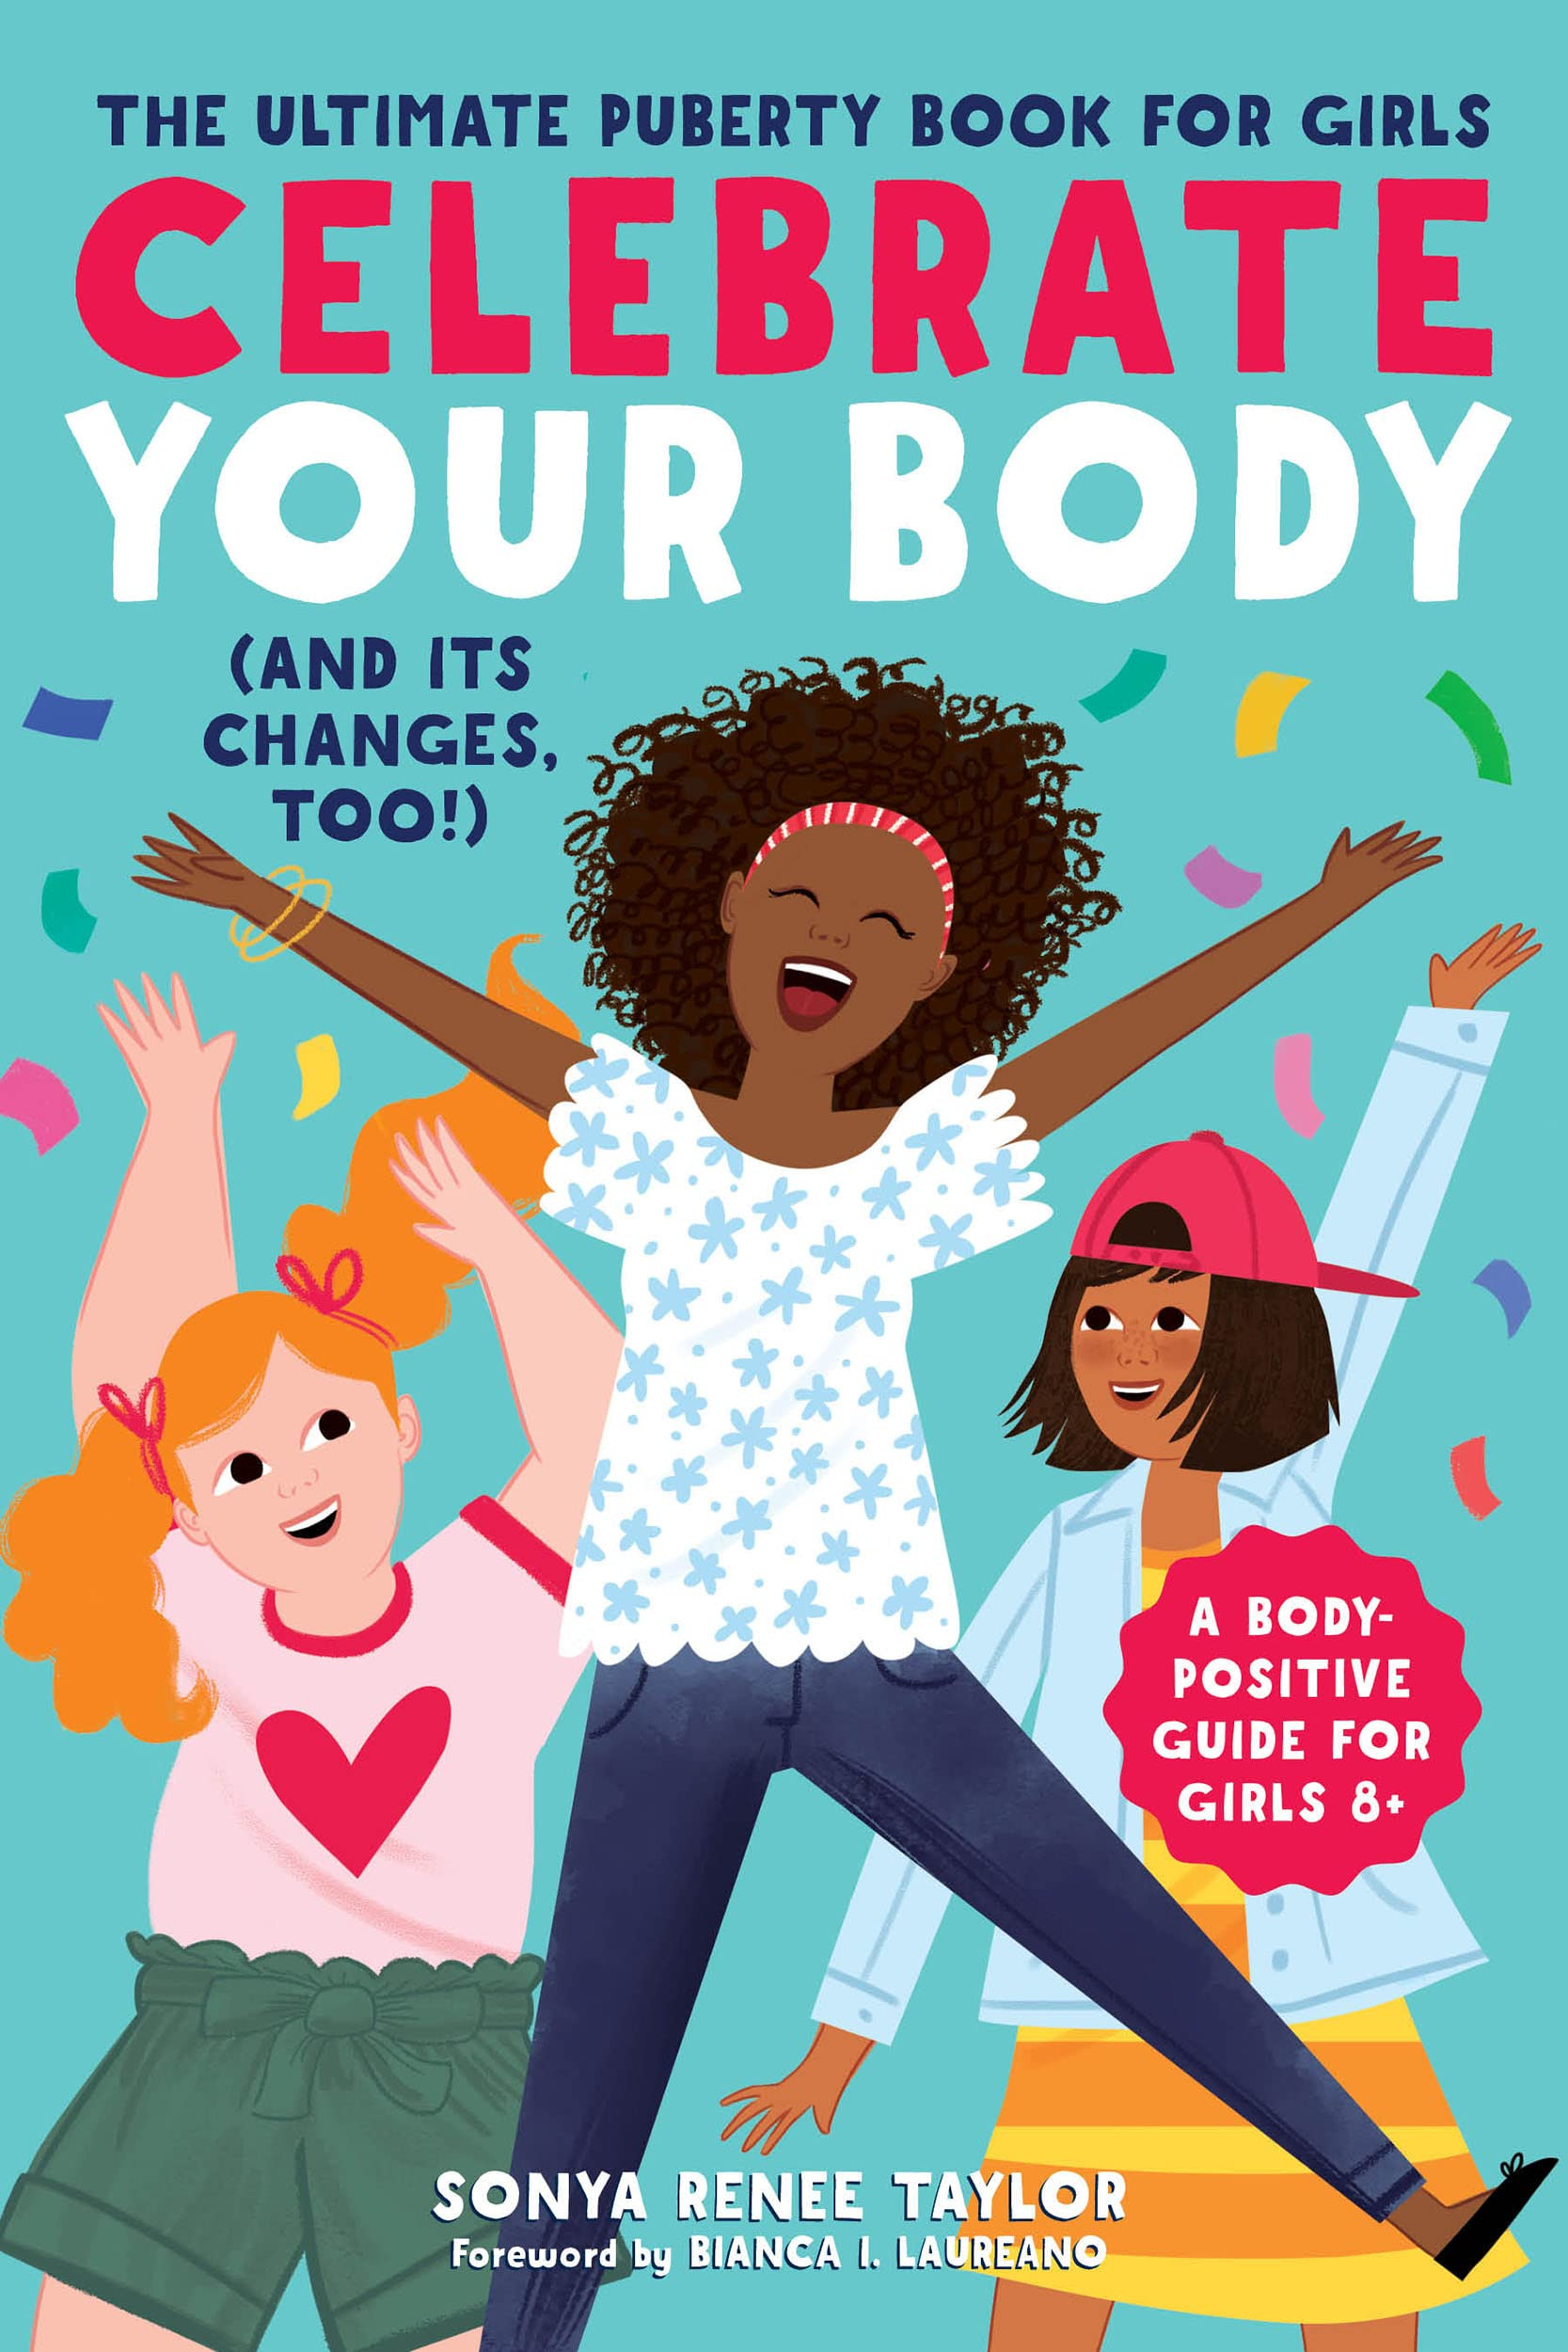 Book cover for 'Celebrate Your Body (and it's changes too!) by Sonya Renee Taylor, containing adolescents smiling and jumping in celebration